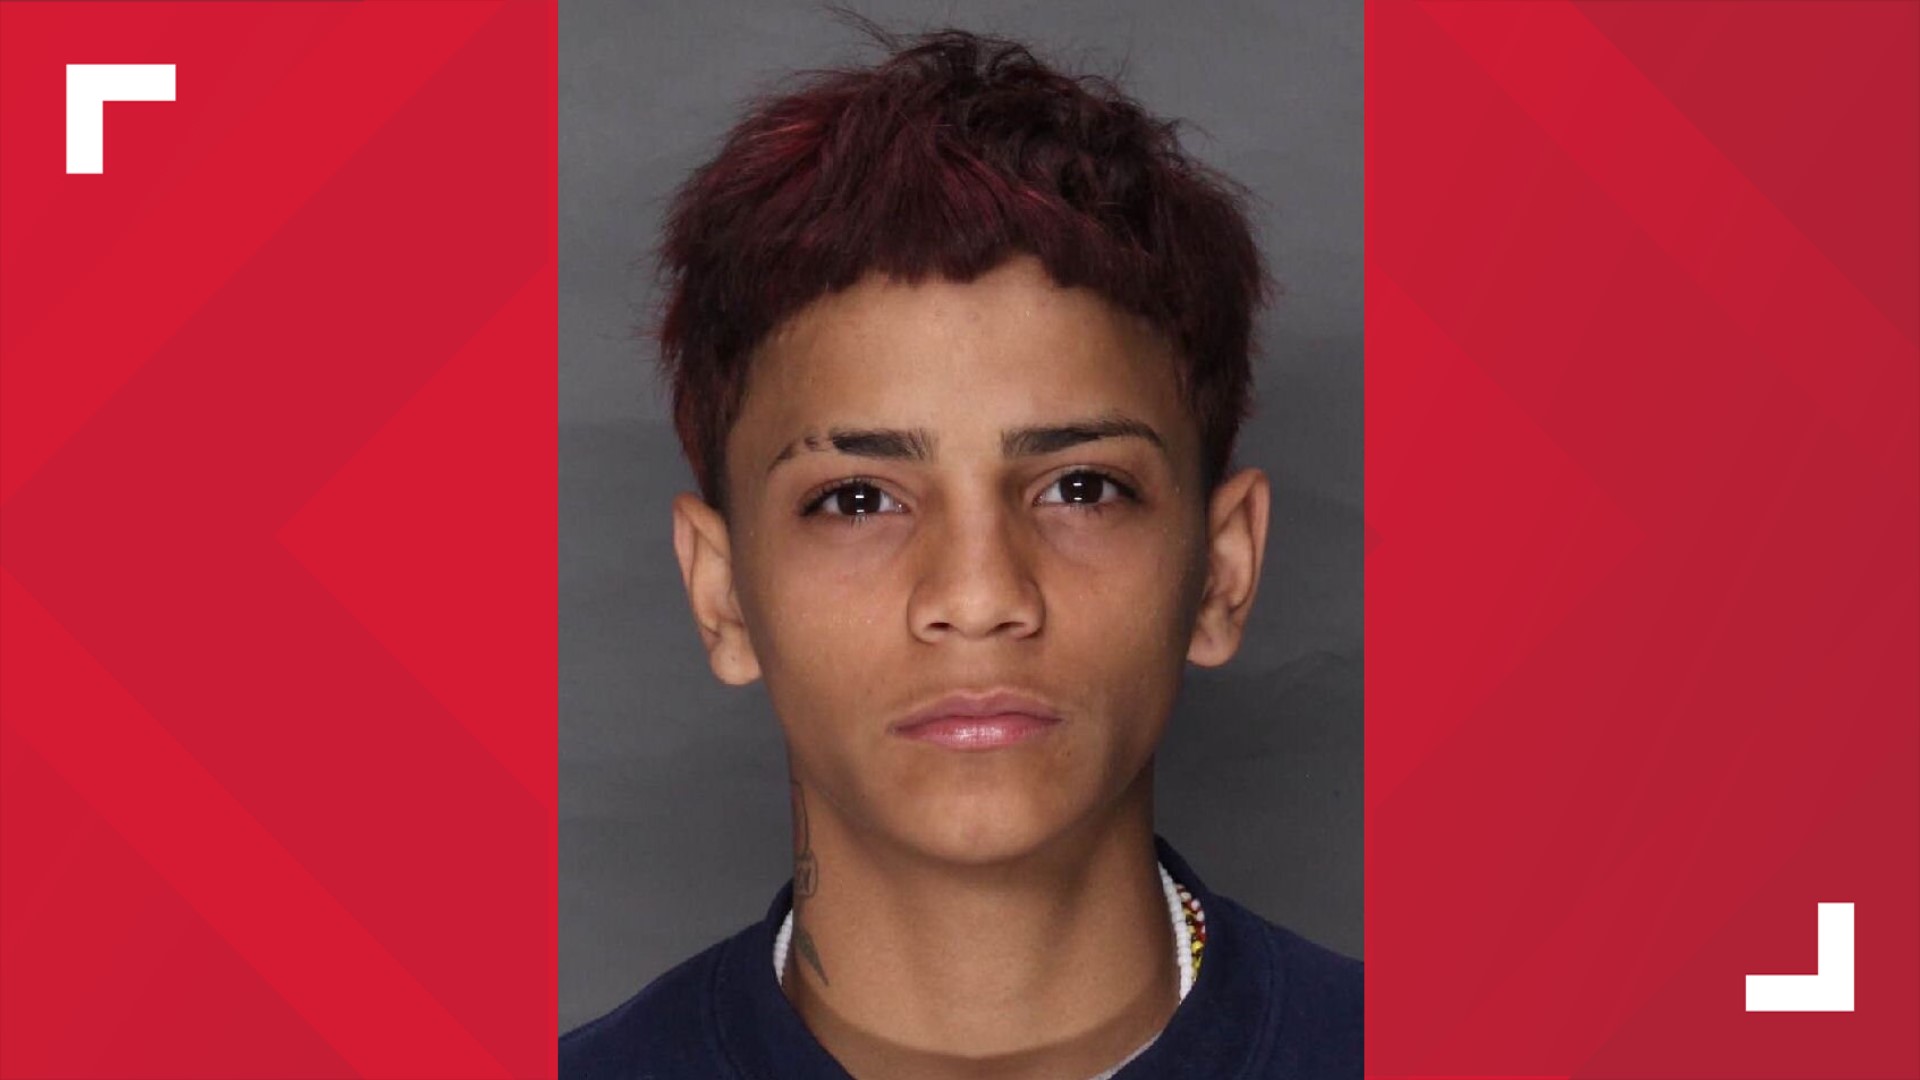 James Fernandez-Reyes, 16, is charged with shooting and killing 3 people last week. He also is wanted in connection to the death of a 12-year-old in Rochester, NY.